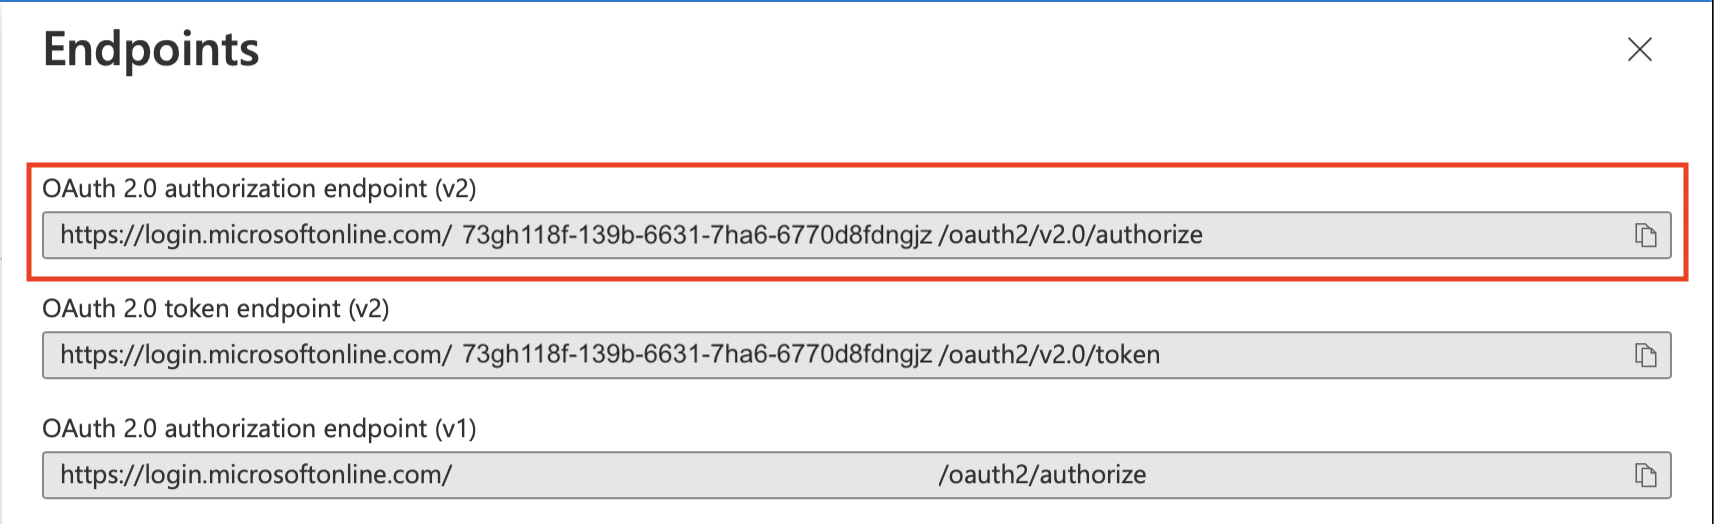 OAuth 2.0 authorization endpoint (v2)